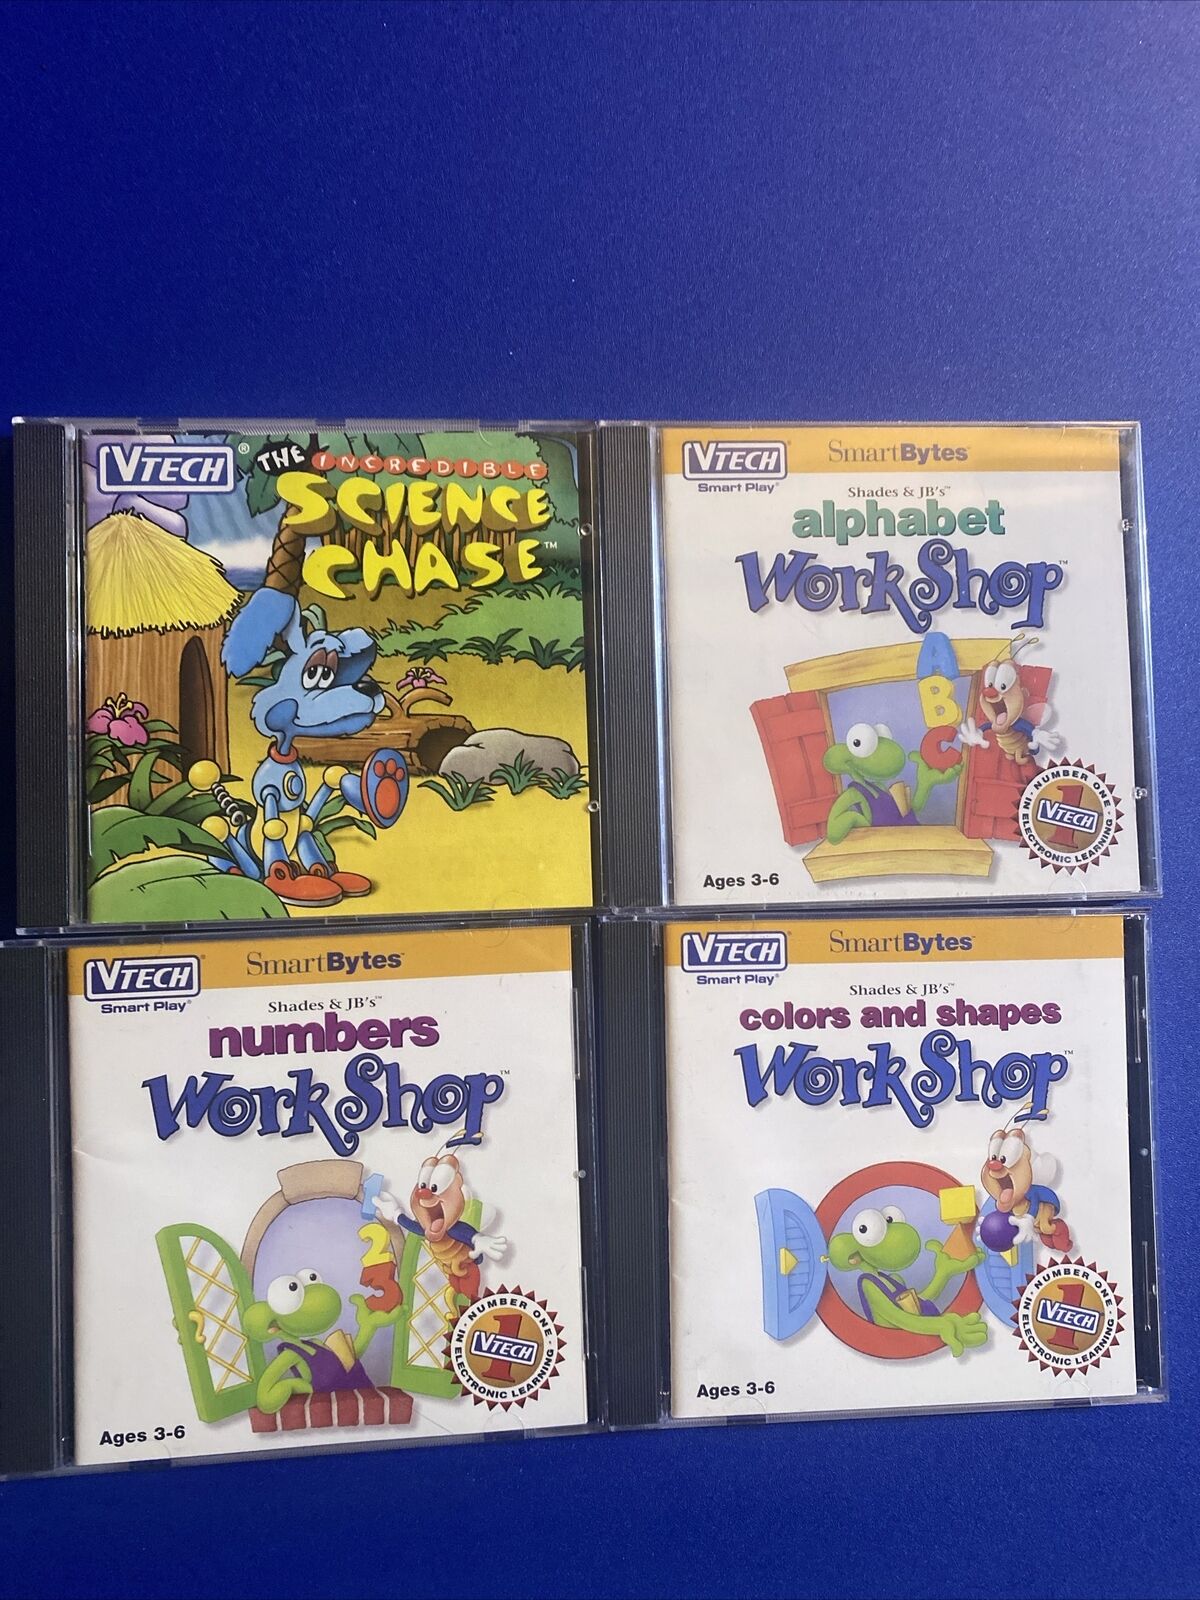 Vtech The Incredible Science Chase CD-Rom & 3 Workshop Learning Pc Games